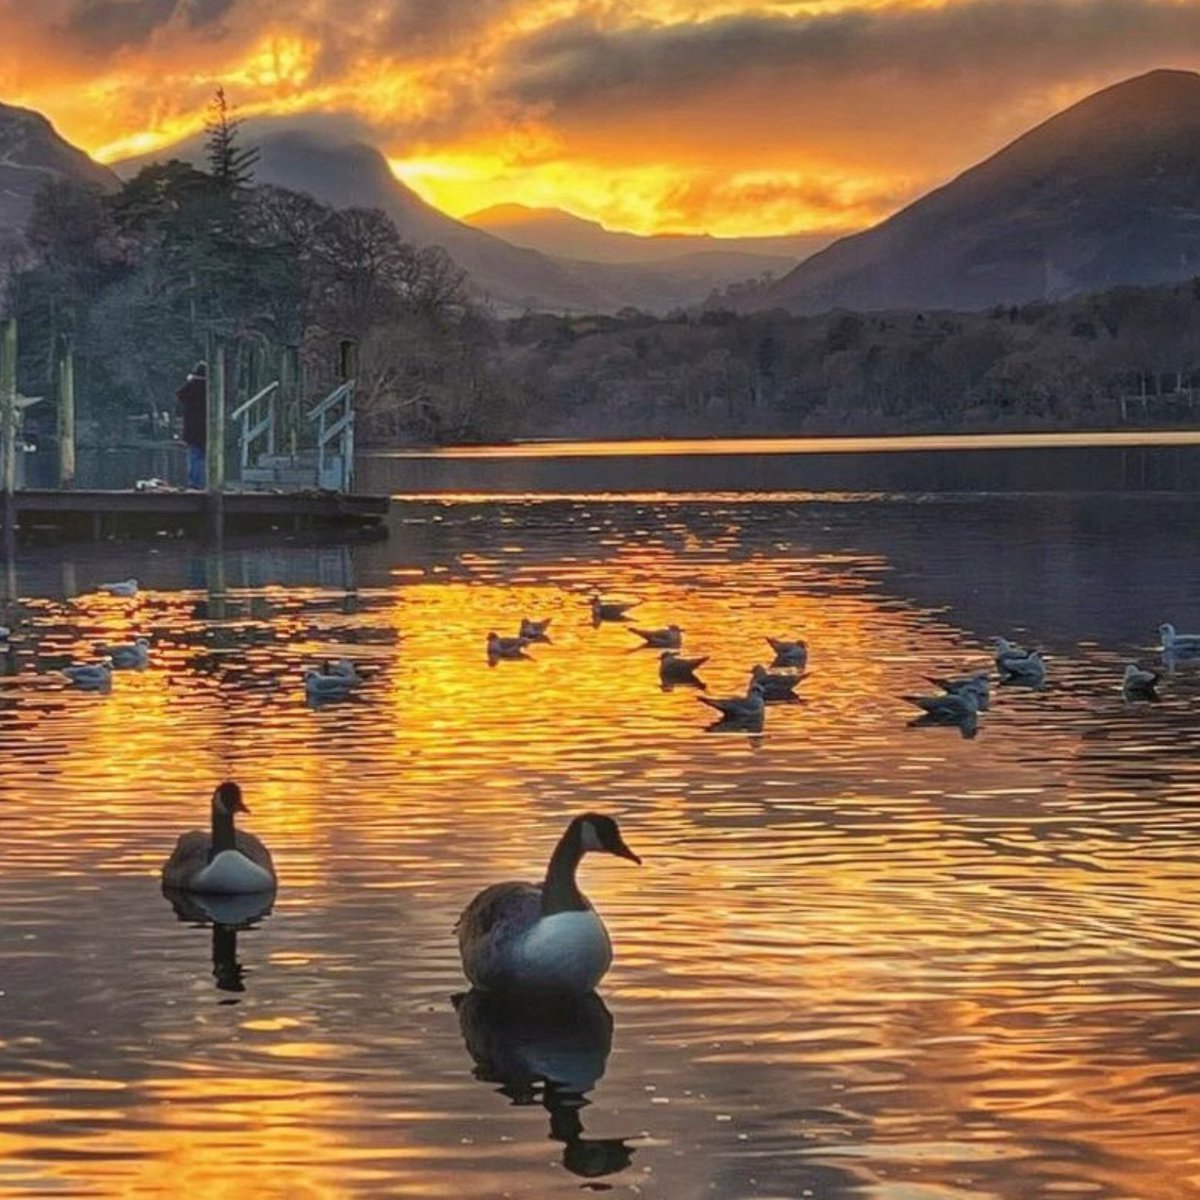 It's #WowWednesday 🌄 Thank you to beautyofcumbria (on Instagram) for capturing this photo of a fiery sunset at Derwentwater 📸